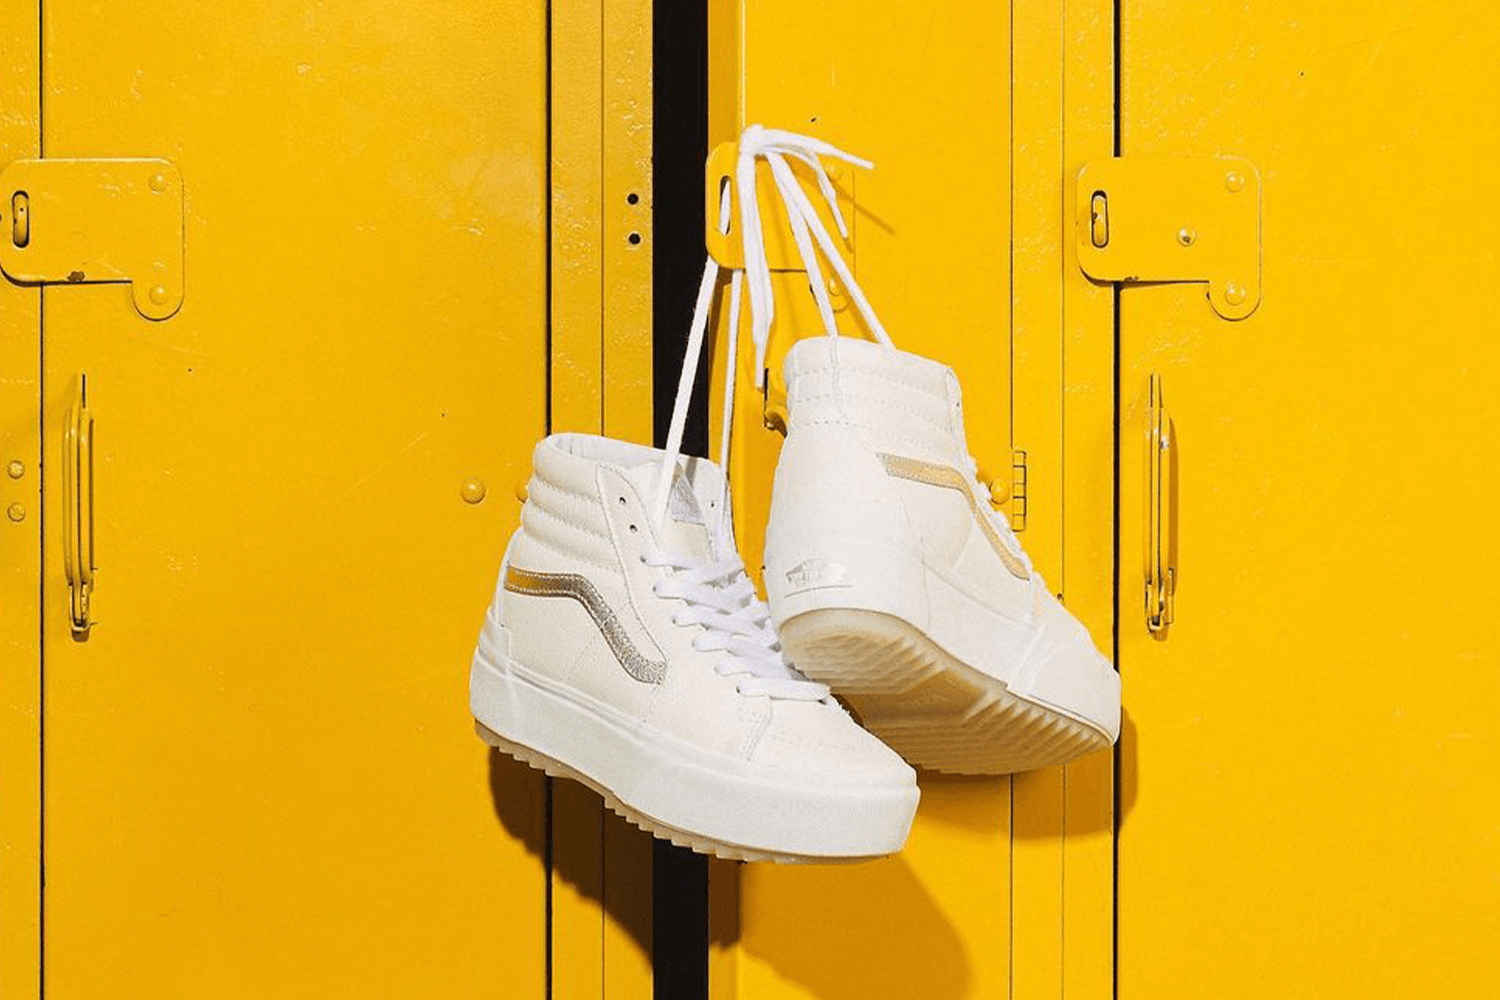 Level up with the platform kicks from Vans